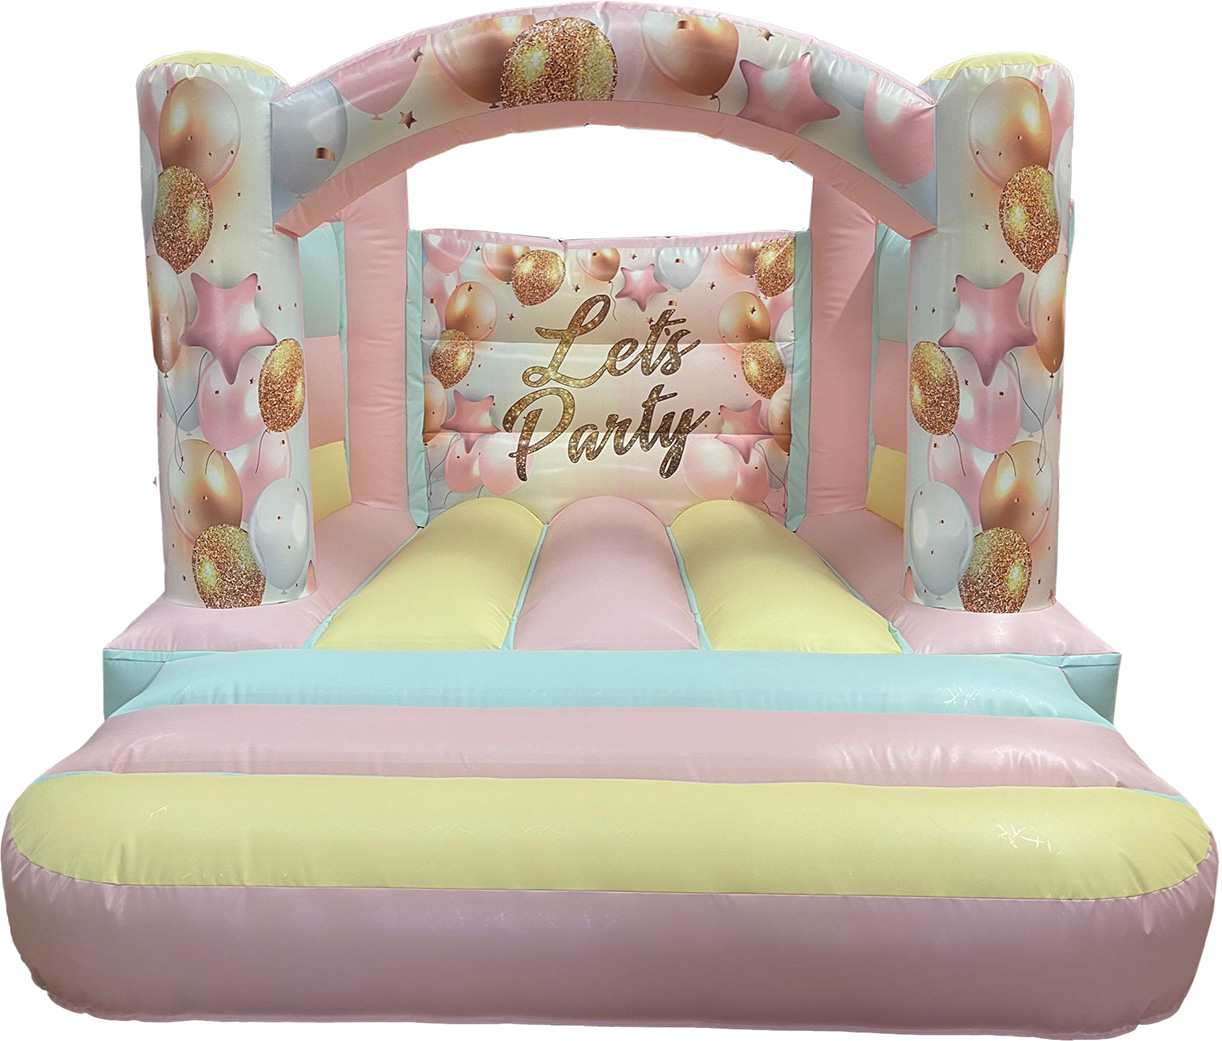 Bouncy Castle Sales - BC692 - Bouncy Inflatable for sale